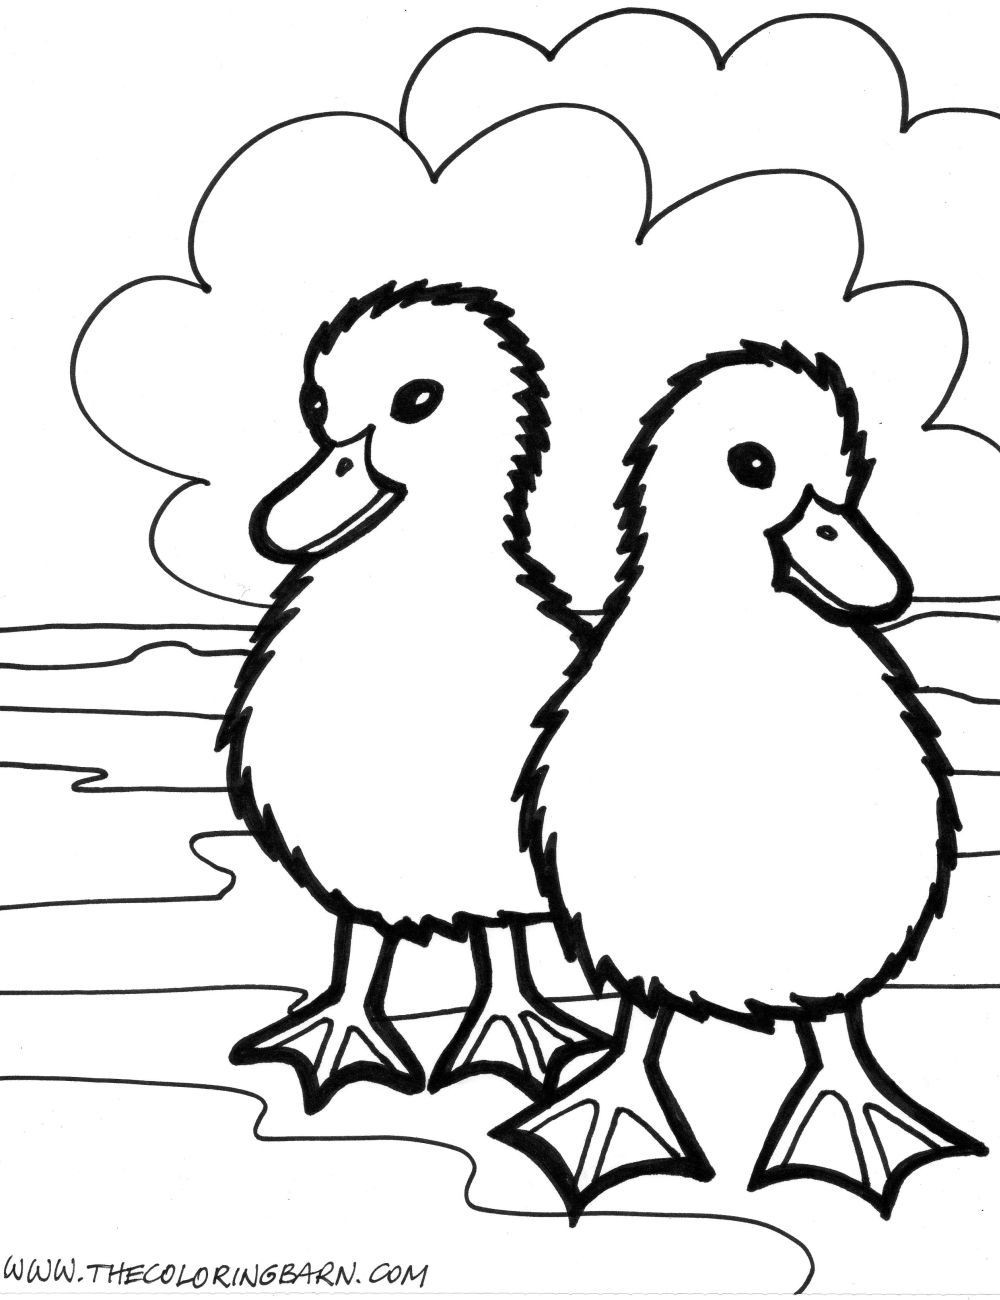 Farm Animal Coloring Pages For Toddlers
 we can say that this printable coloring pages are very